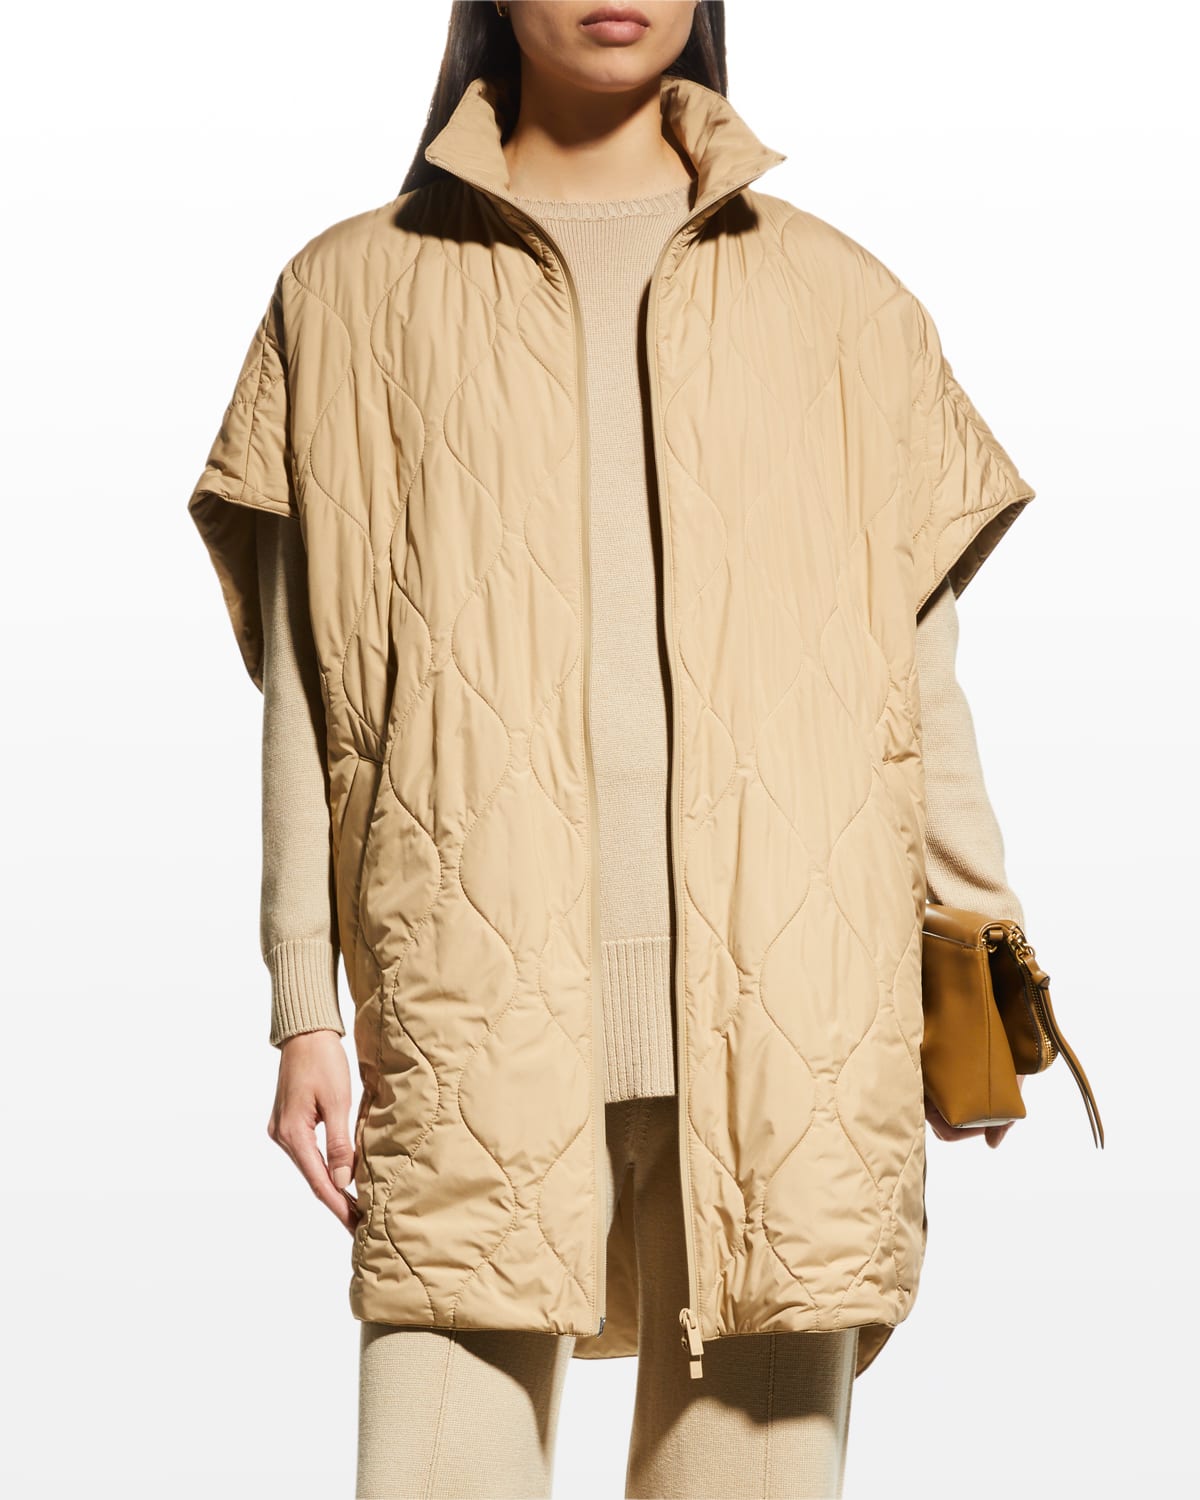 Max Mara Leisure Odino Quilted Zip-Front Jacket